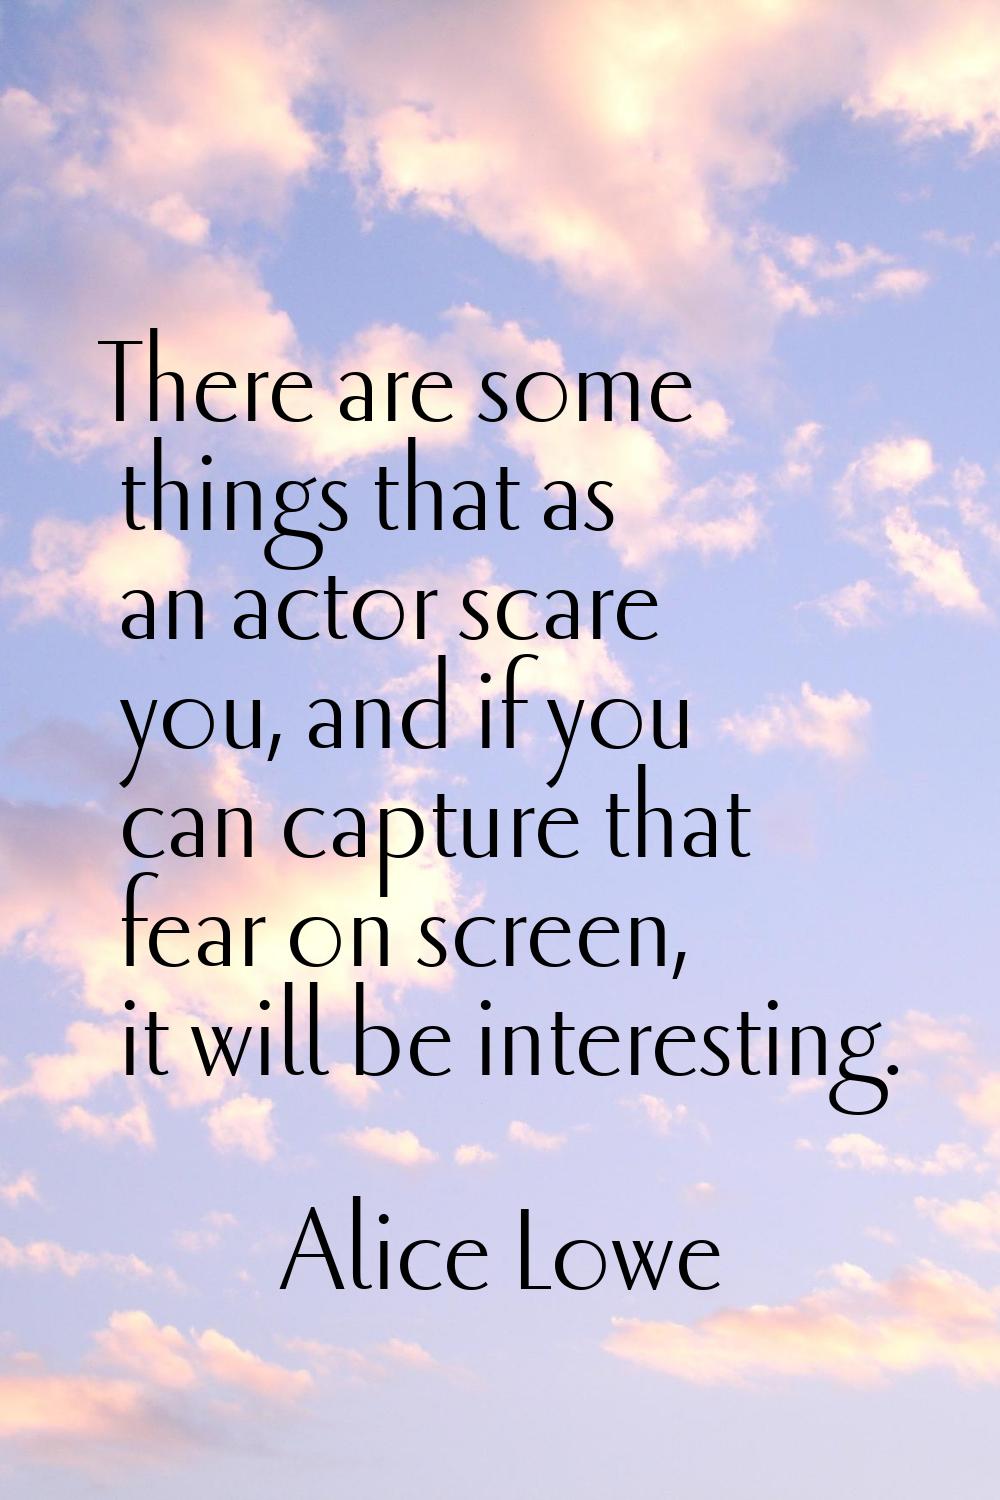 There are some things that as an actor scare you, and if you can capture that fear on screen, it wi